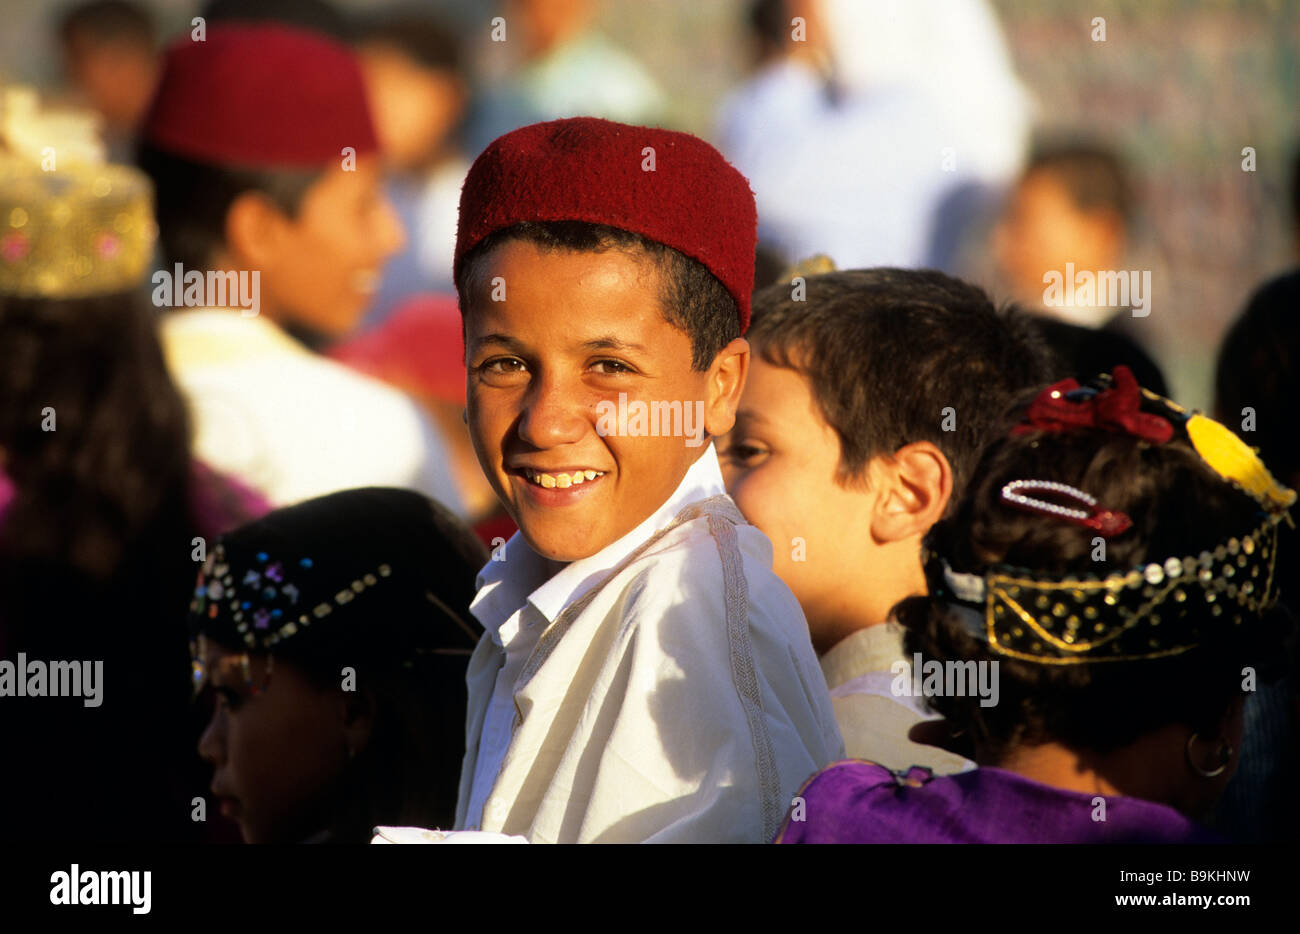 Tunisia, boy with local outfit Stock Photo